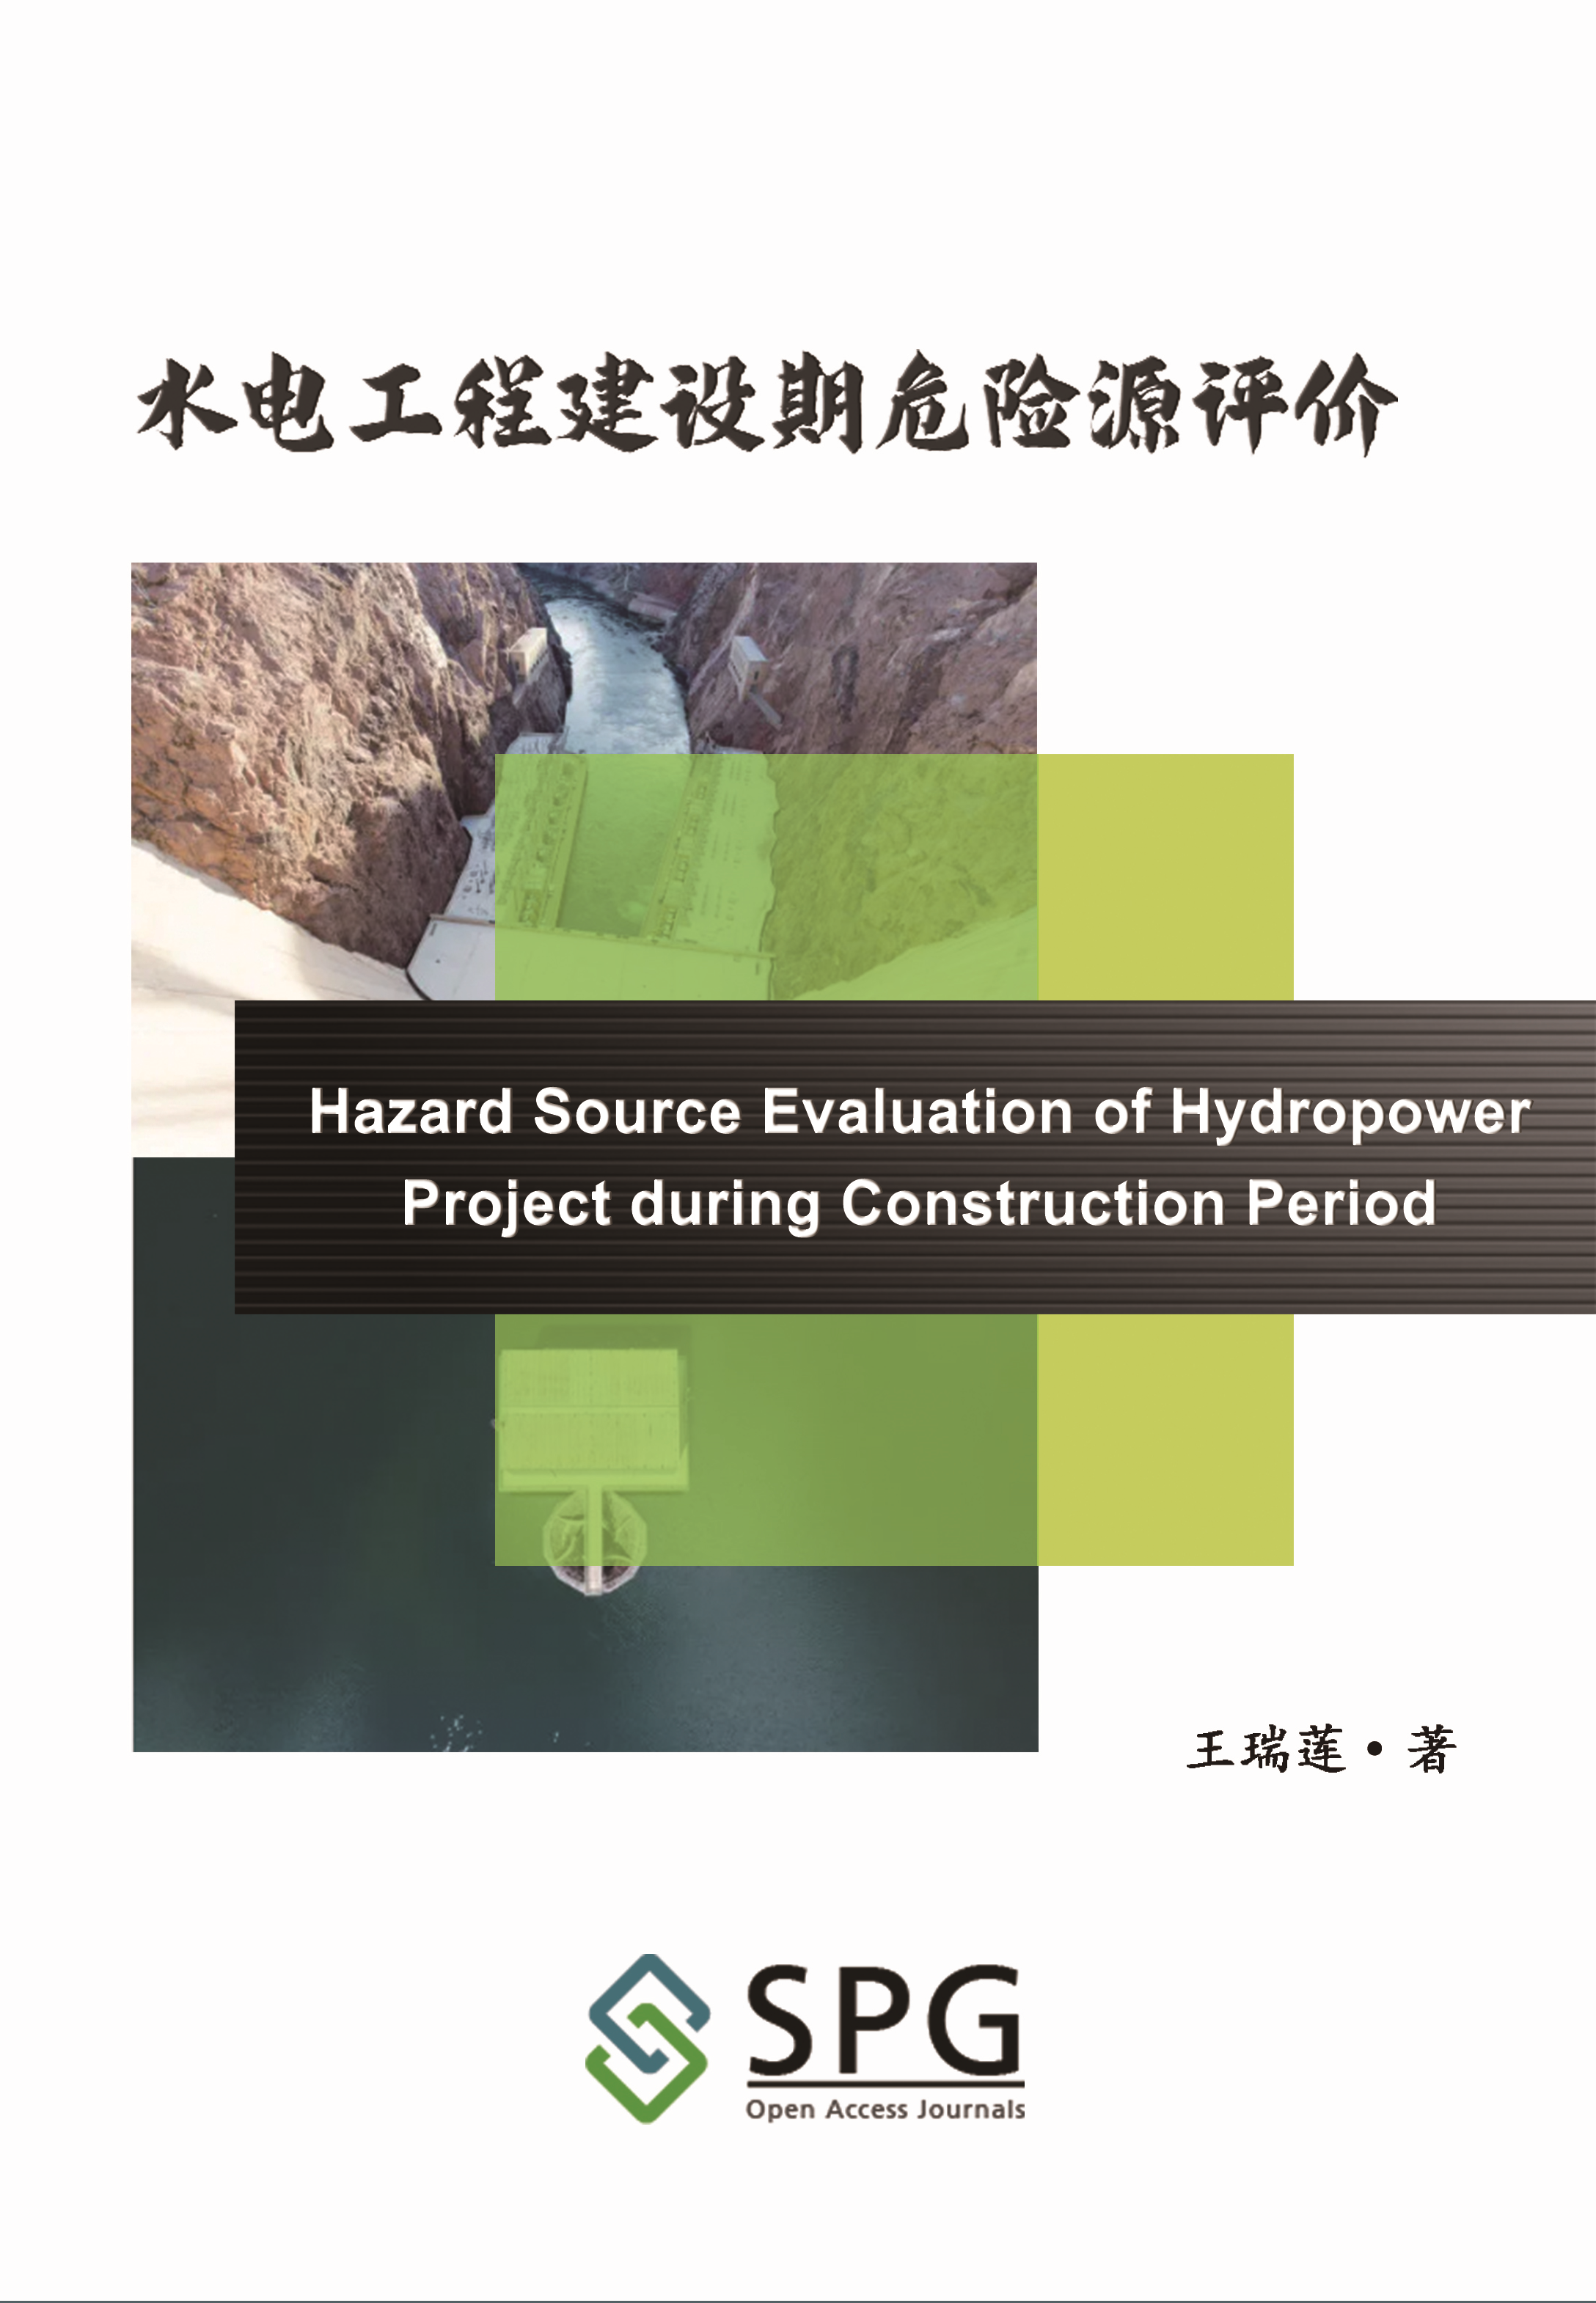 Hazard Source Evaluation of Hydropower Project during Construction Period | Scholar Publishing Group